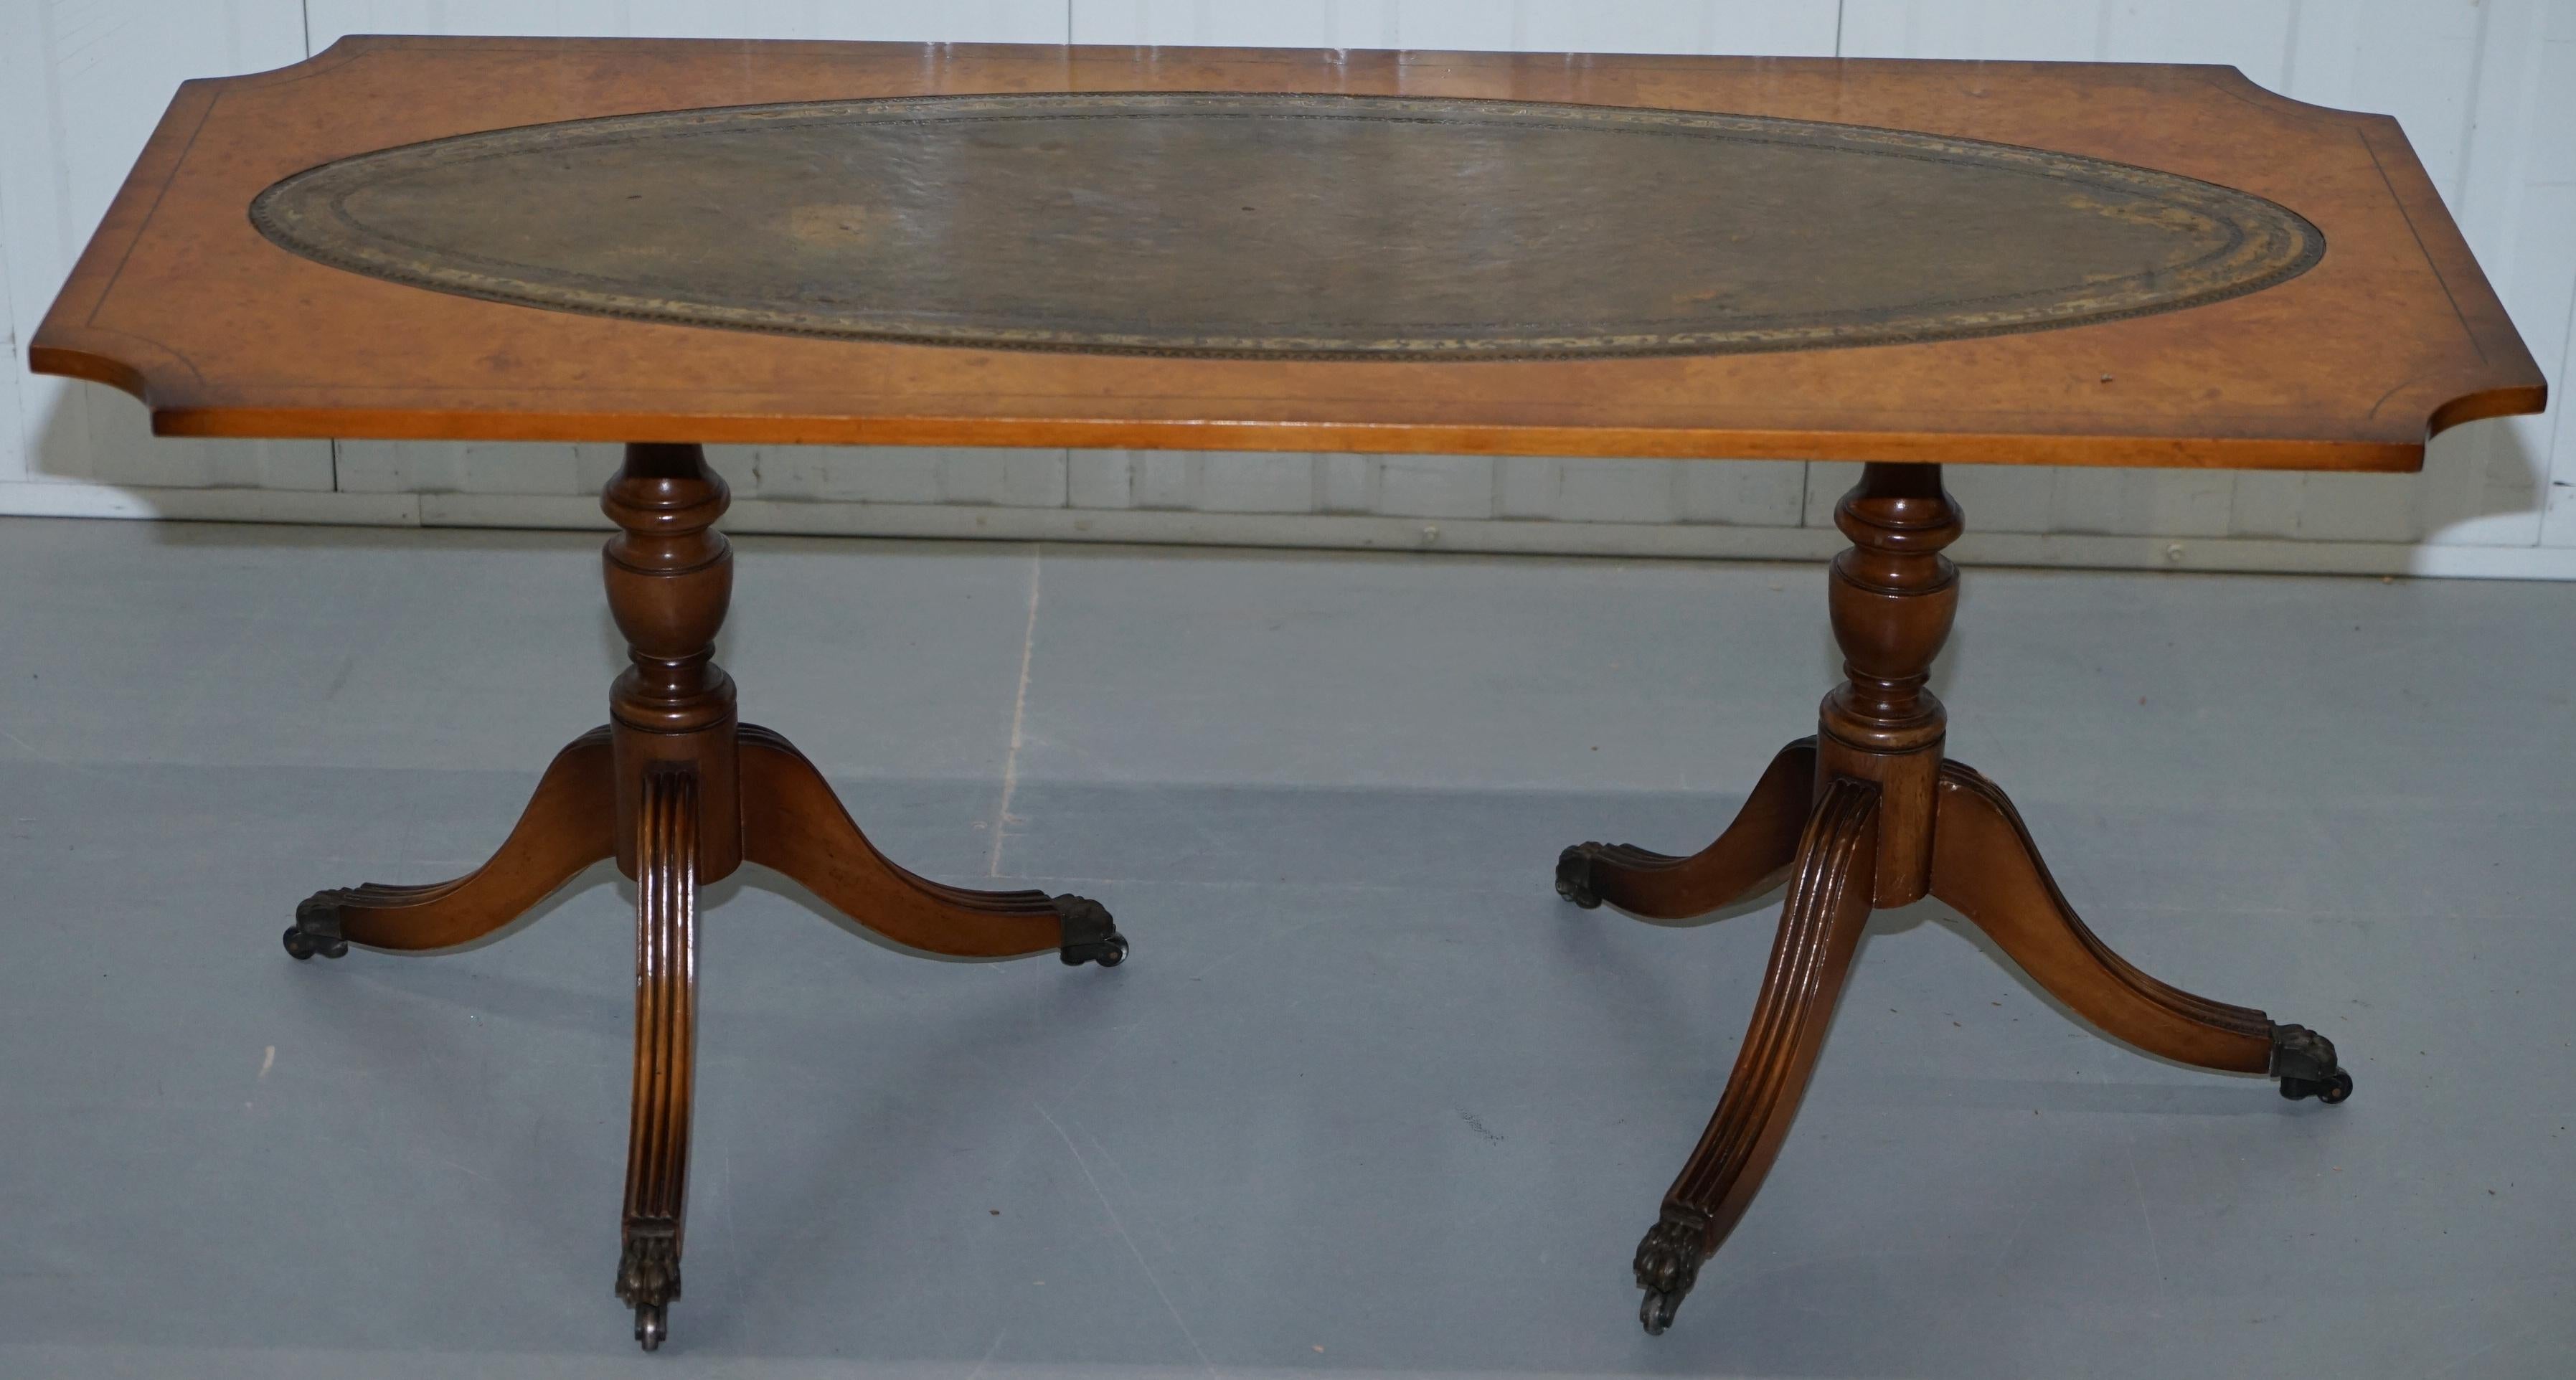 We are delighted to offer for sale this very good looking vintage Burr Walnut coffee table with aged green leather top finished with Lion paw castors

Please note the delivery fee listed is just a guide, it covers within the M25 only, for an